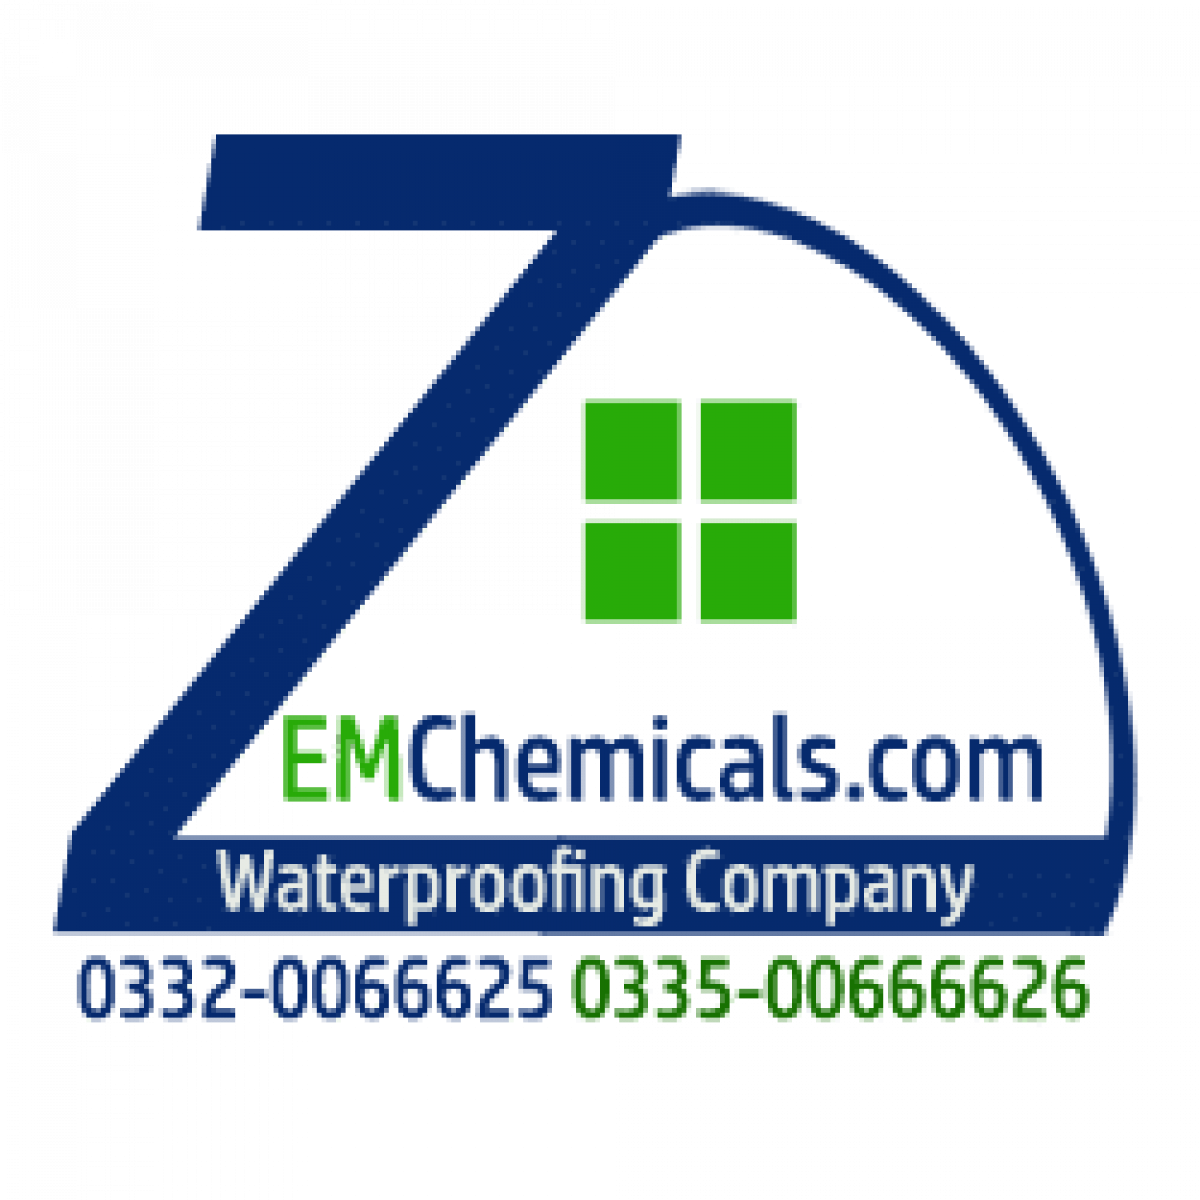 Zem Chemicals Roof Waterproofing services